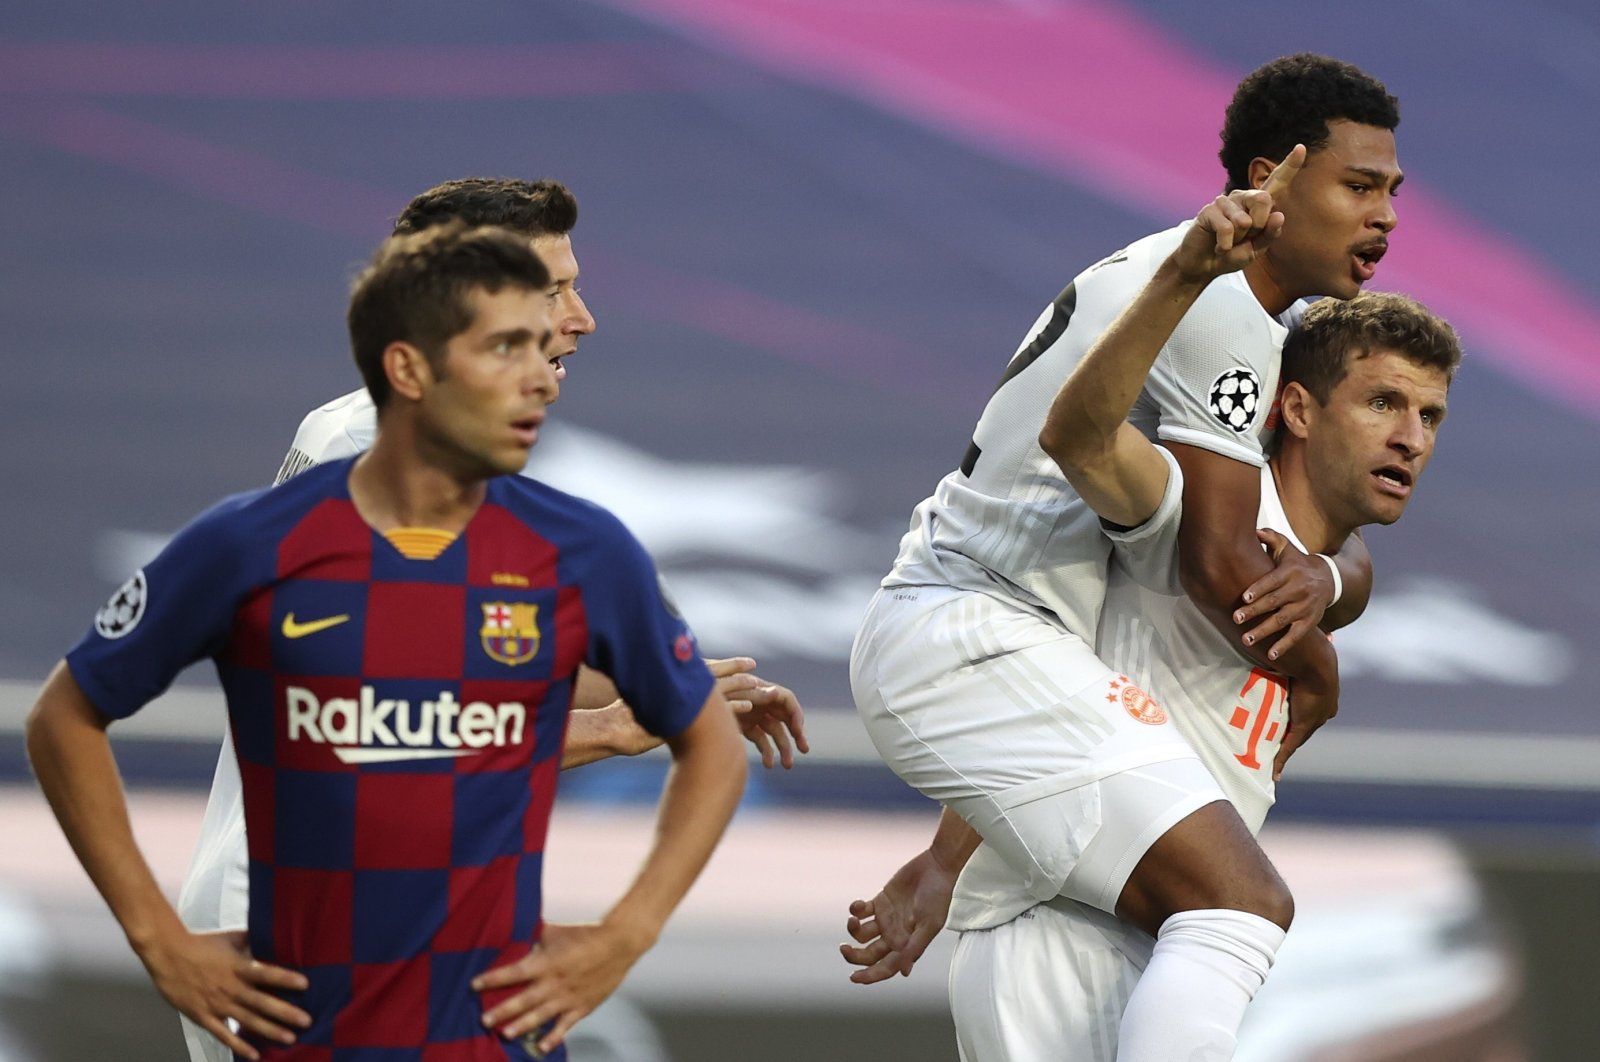 Bayern Munich's Thomas Muller (R) celebrates with Serge Gnabry after scoring a goal during a UEFA Champions League match against Barcelona in Lisbon, Portugal, Aug. 14, 2020. (AP Photo)